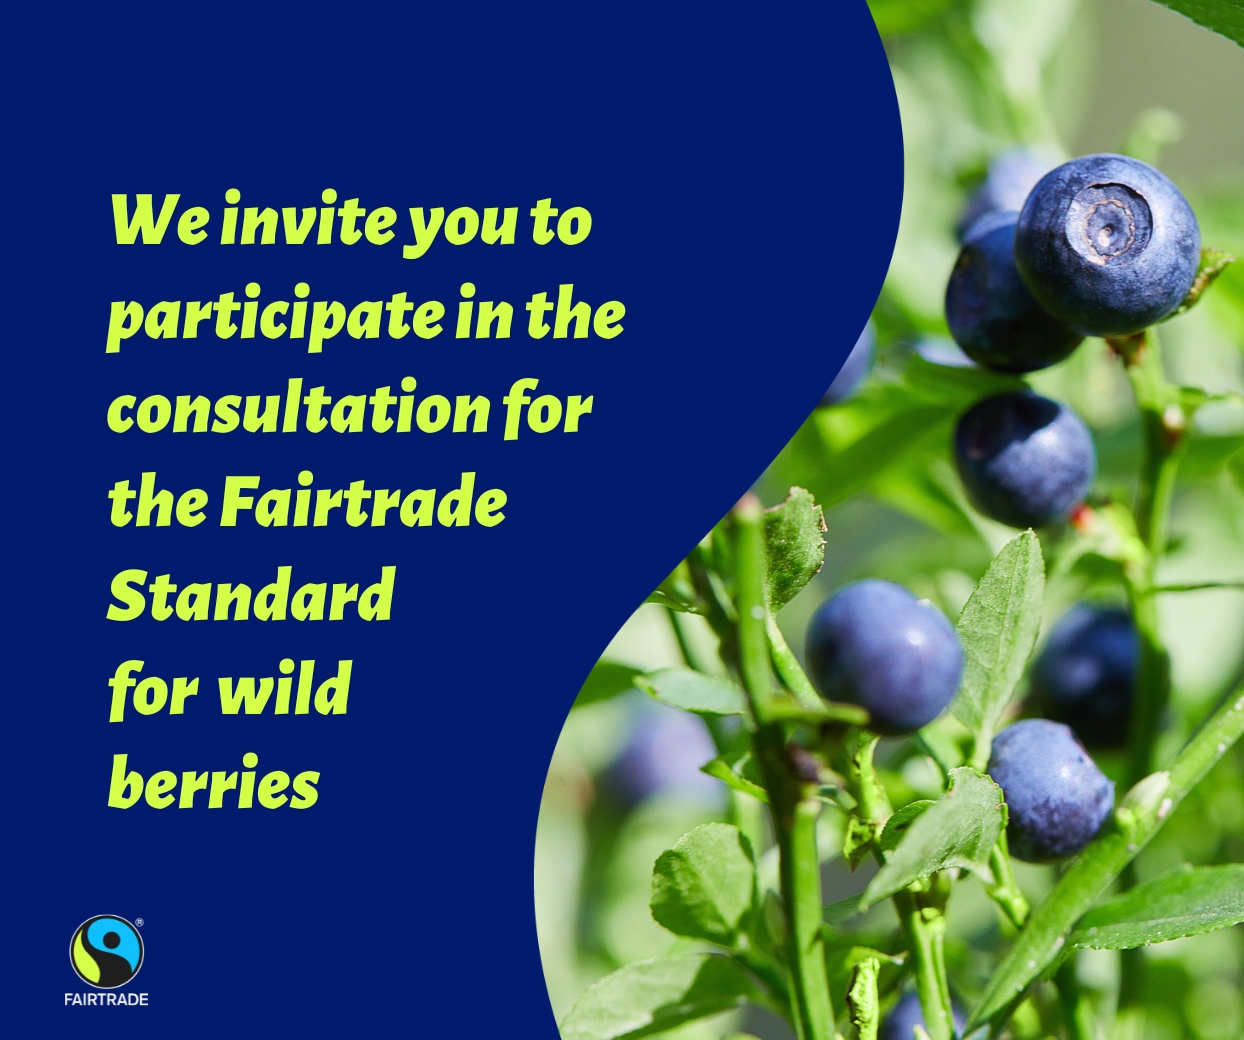 We invite you to participate in the consultation for the Fairtrade Standard for wild berries